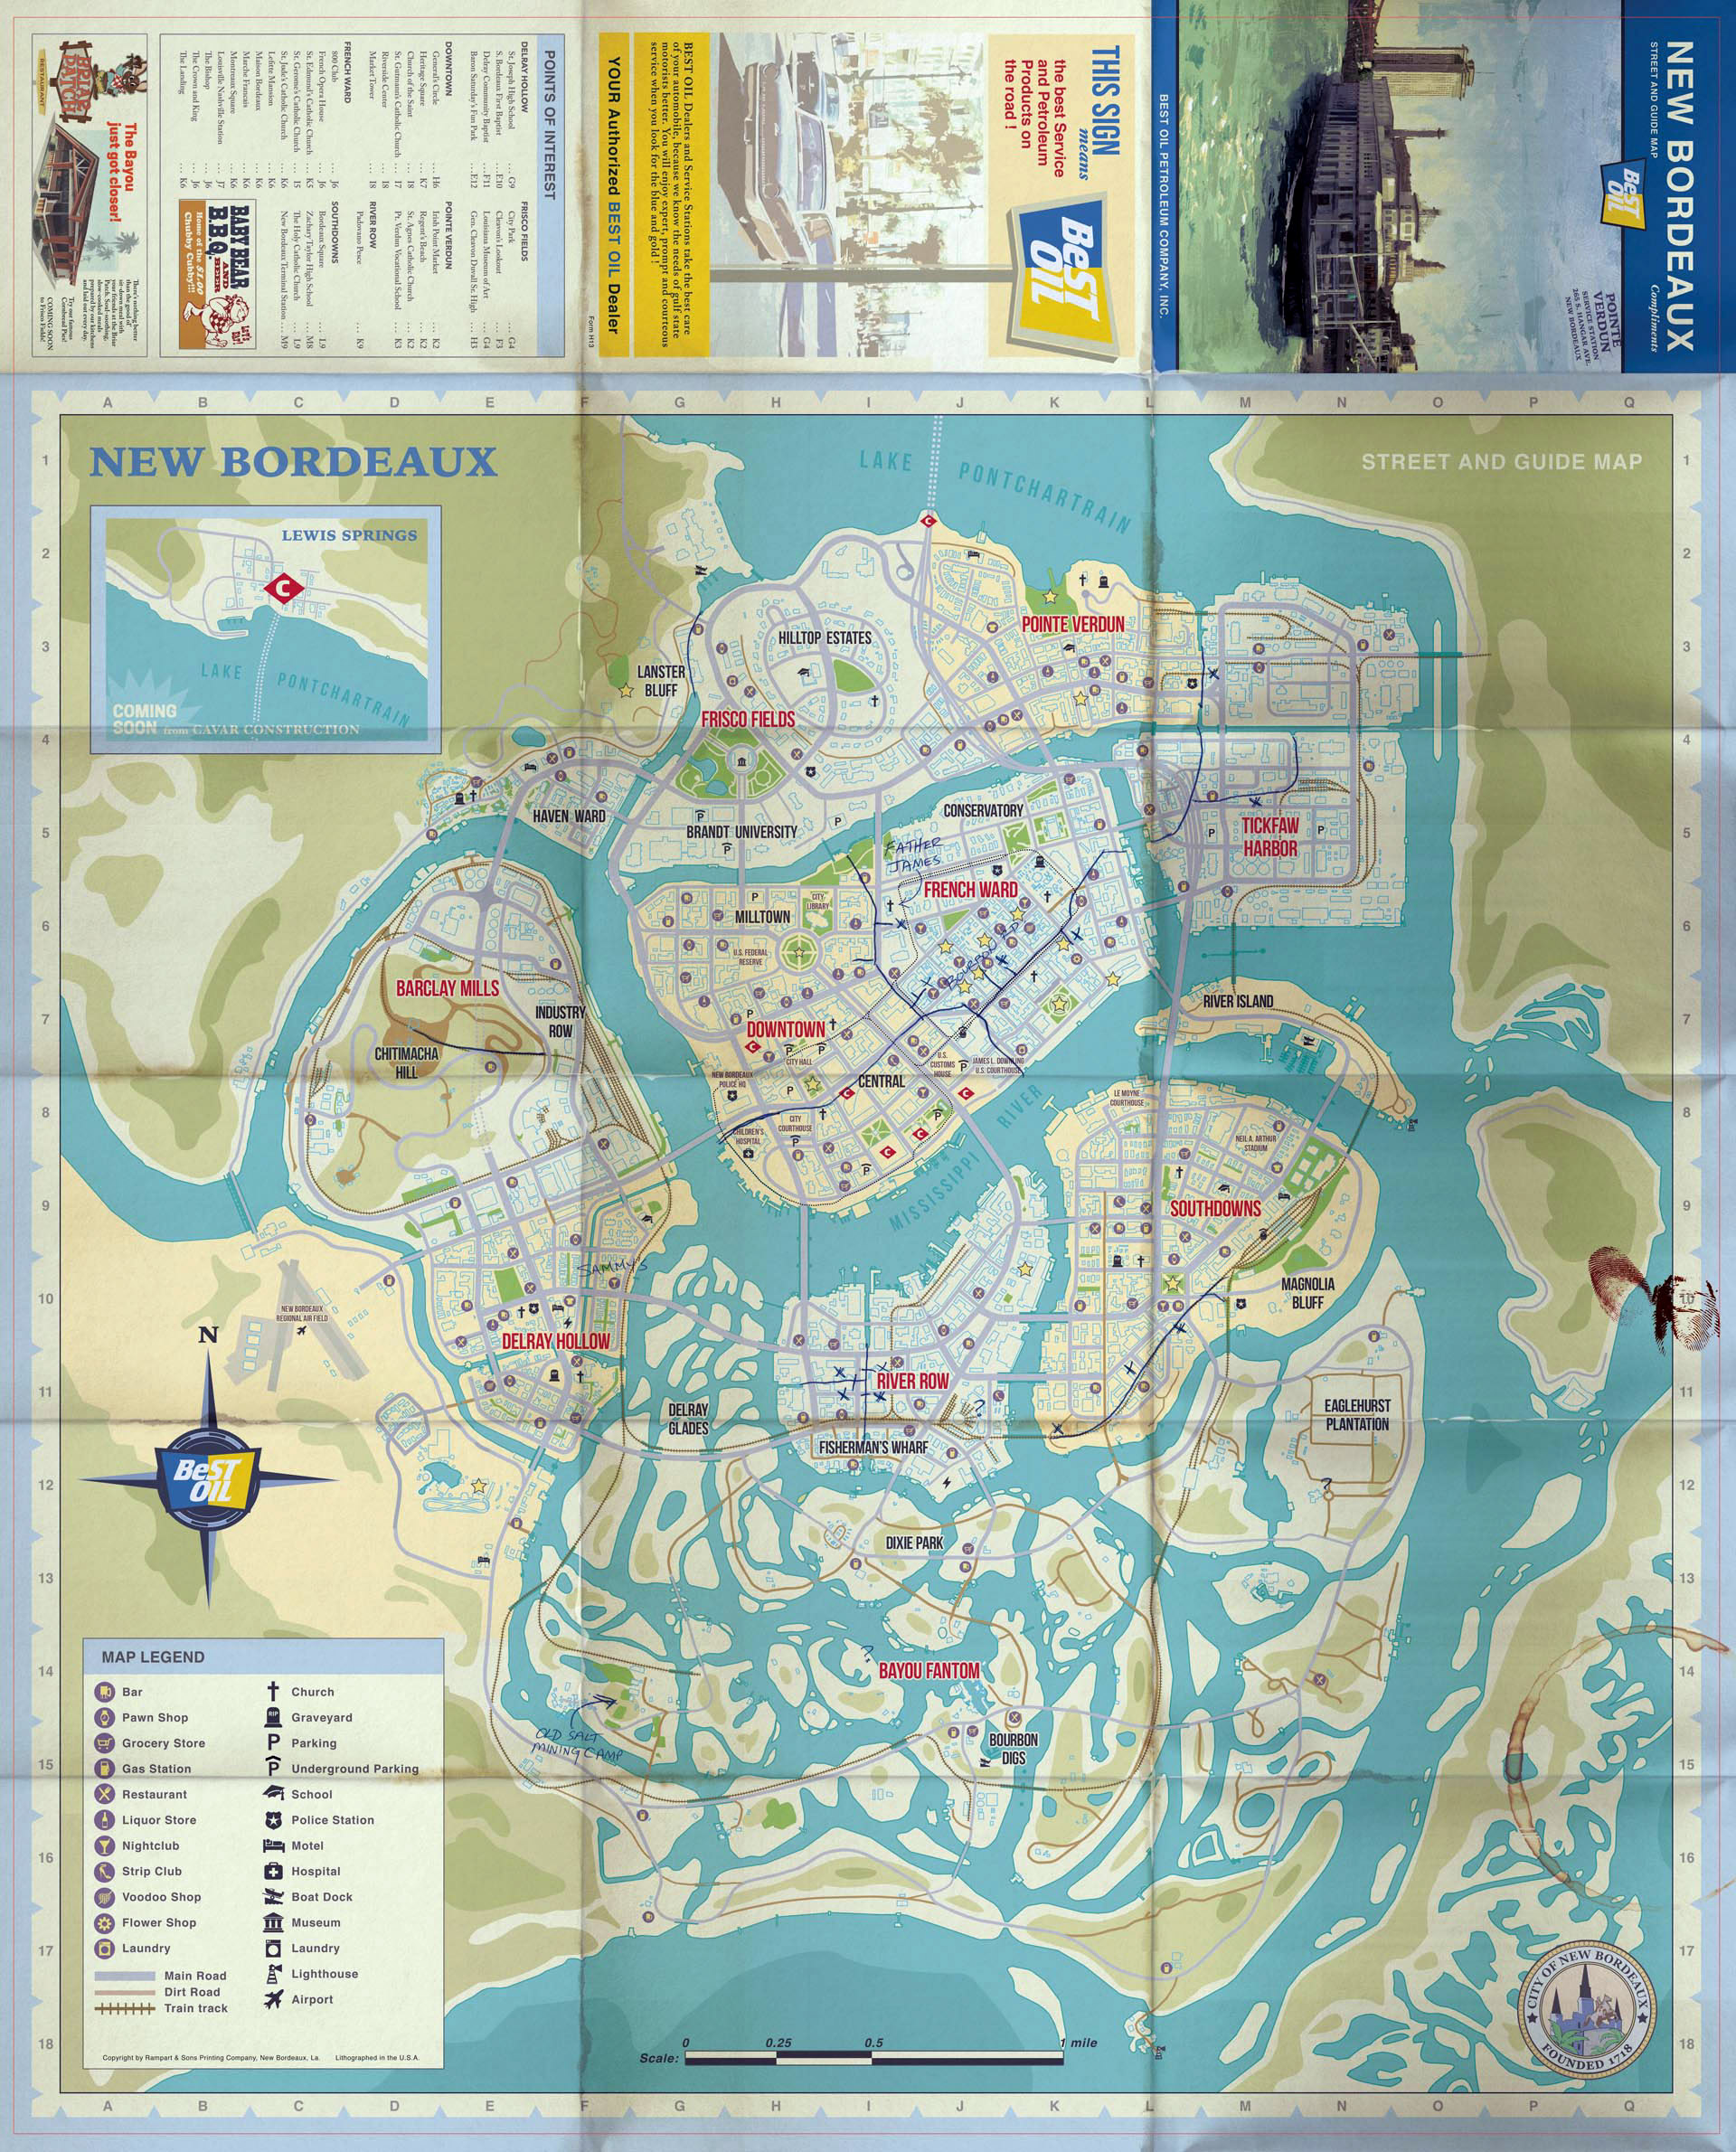 Detailed map of Fallout 3 world, Games, Mapsland